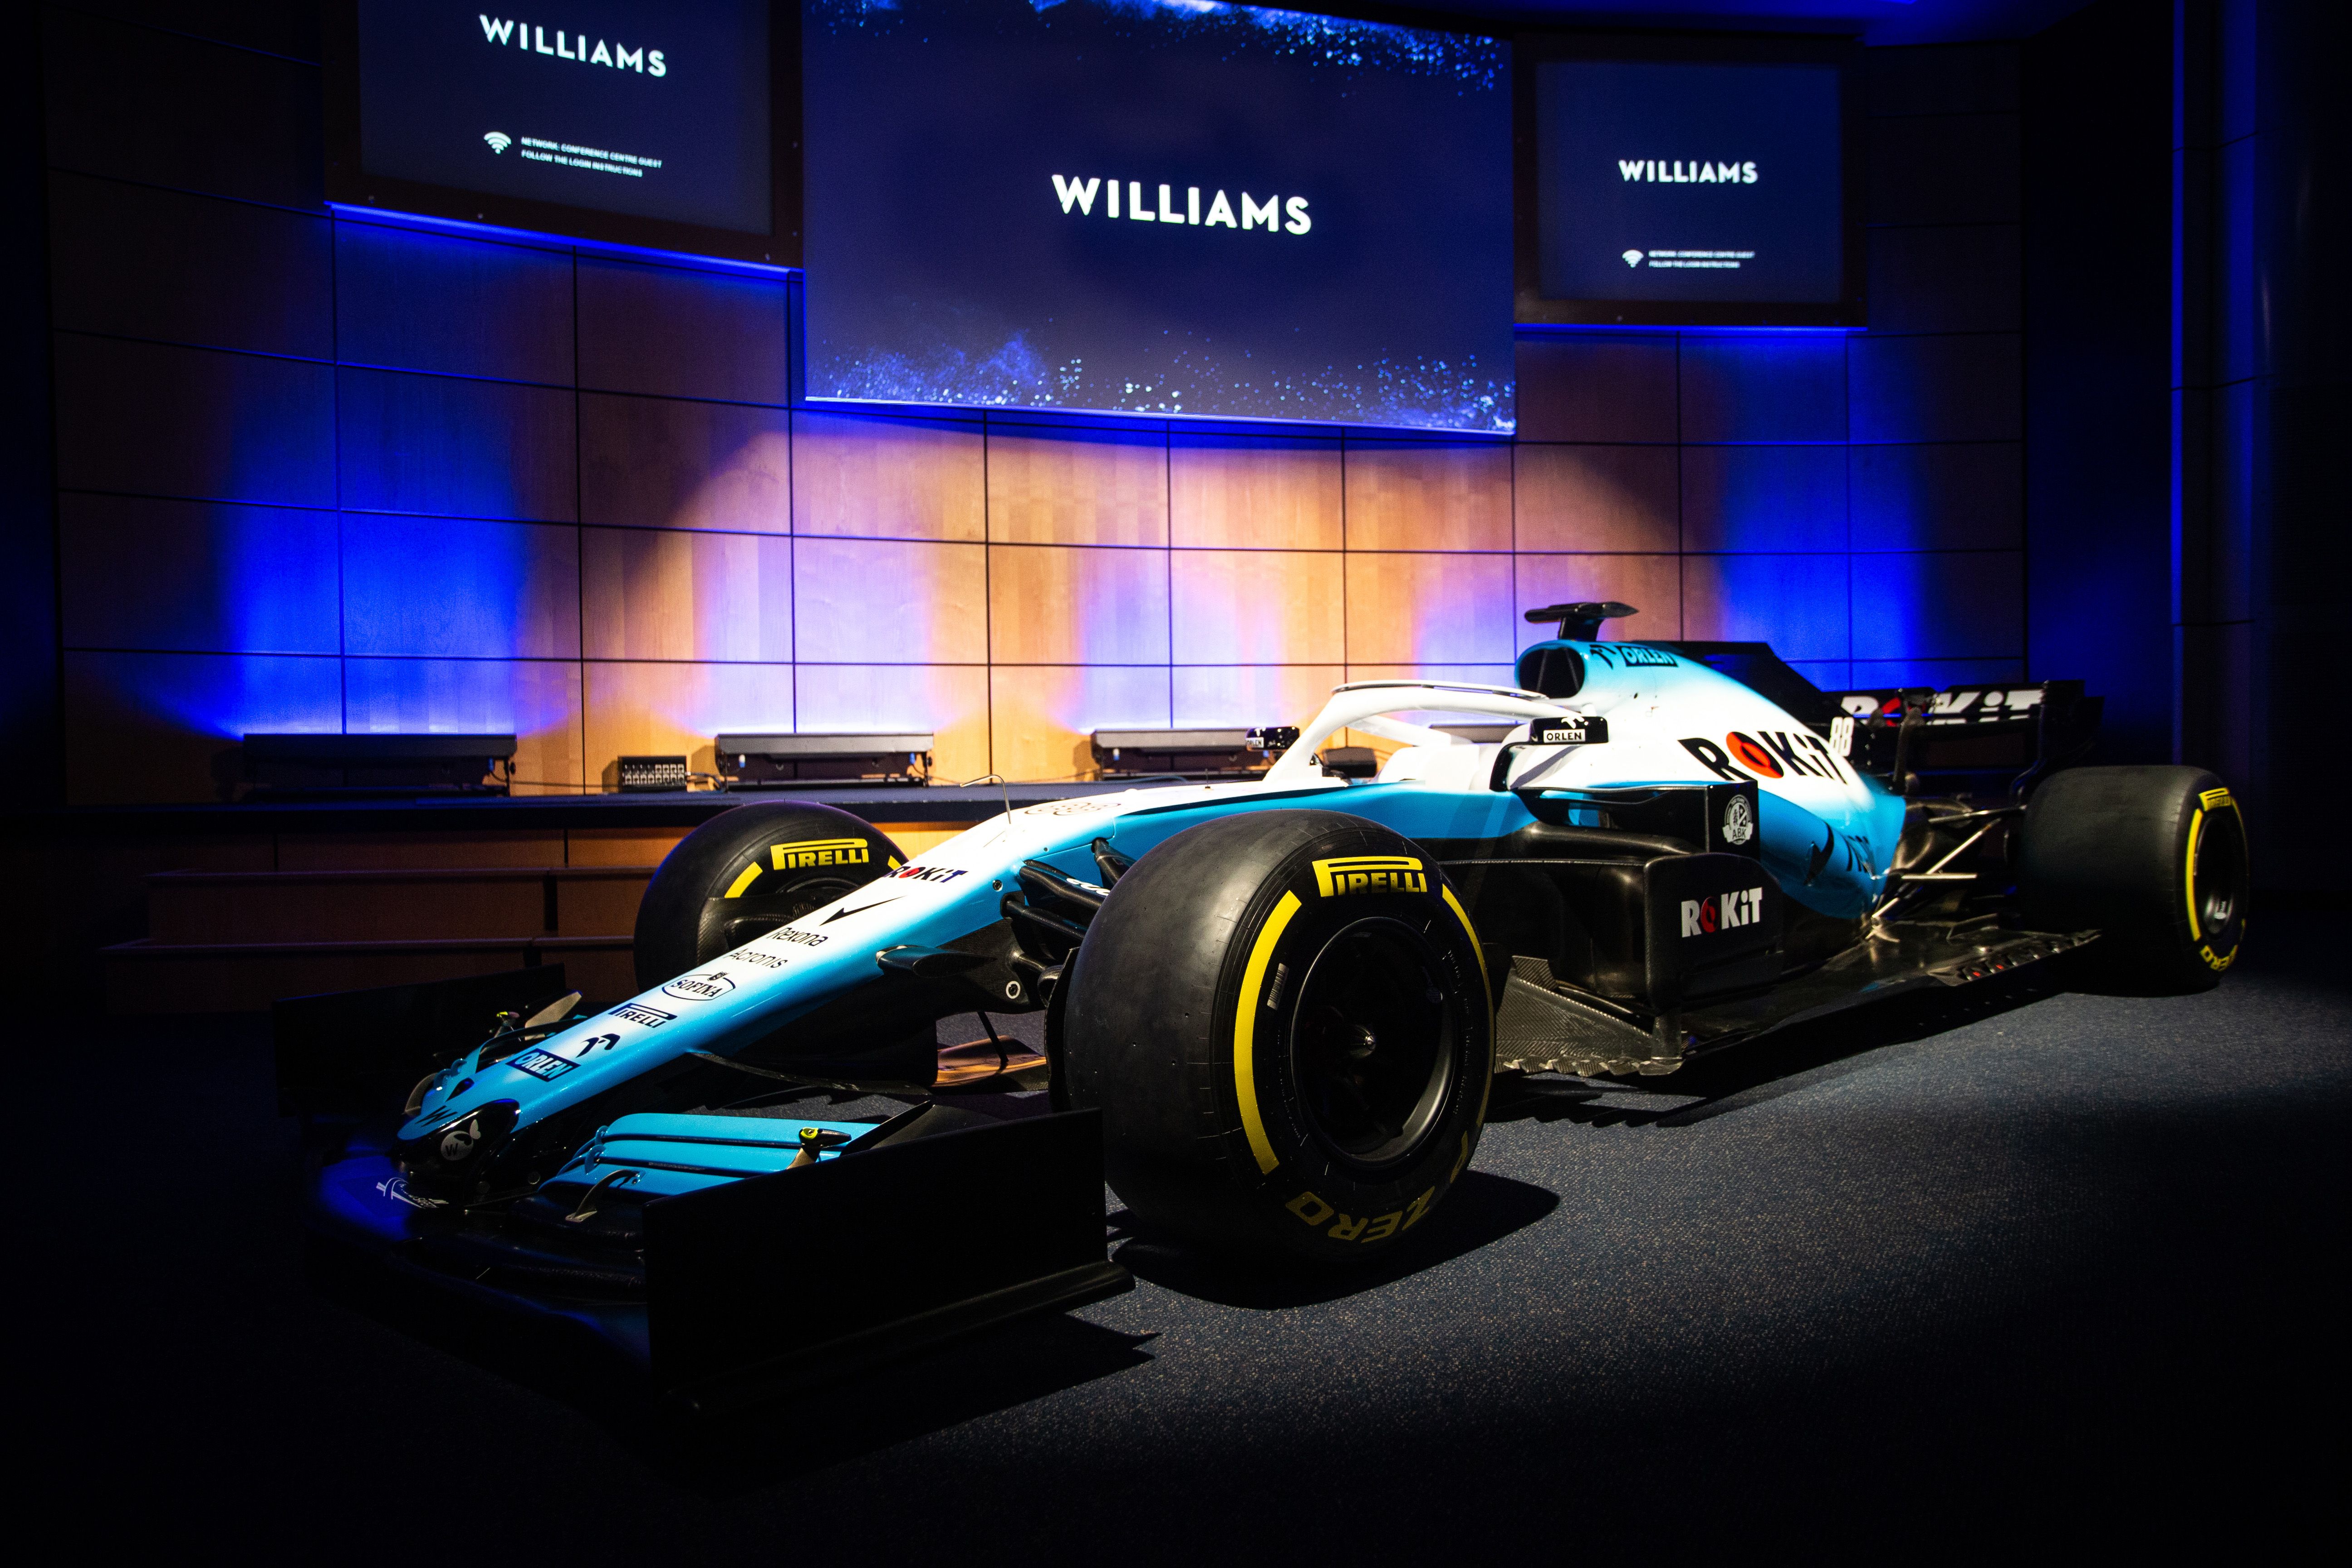 Here You Can Find The First Wallpaper Pictures Of Williams